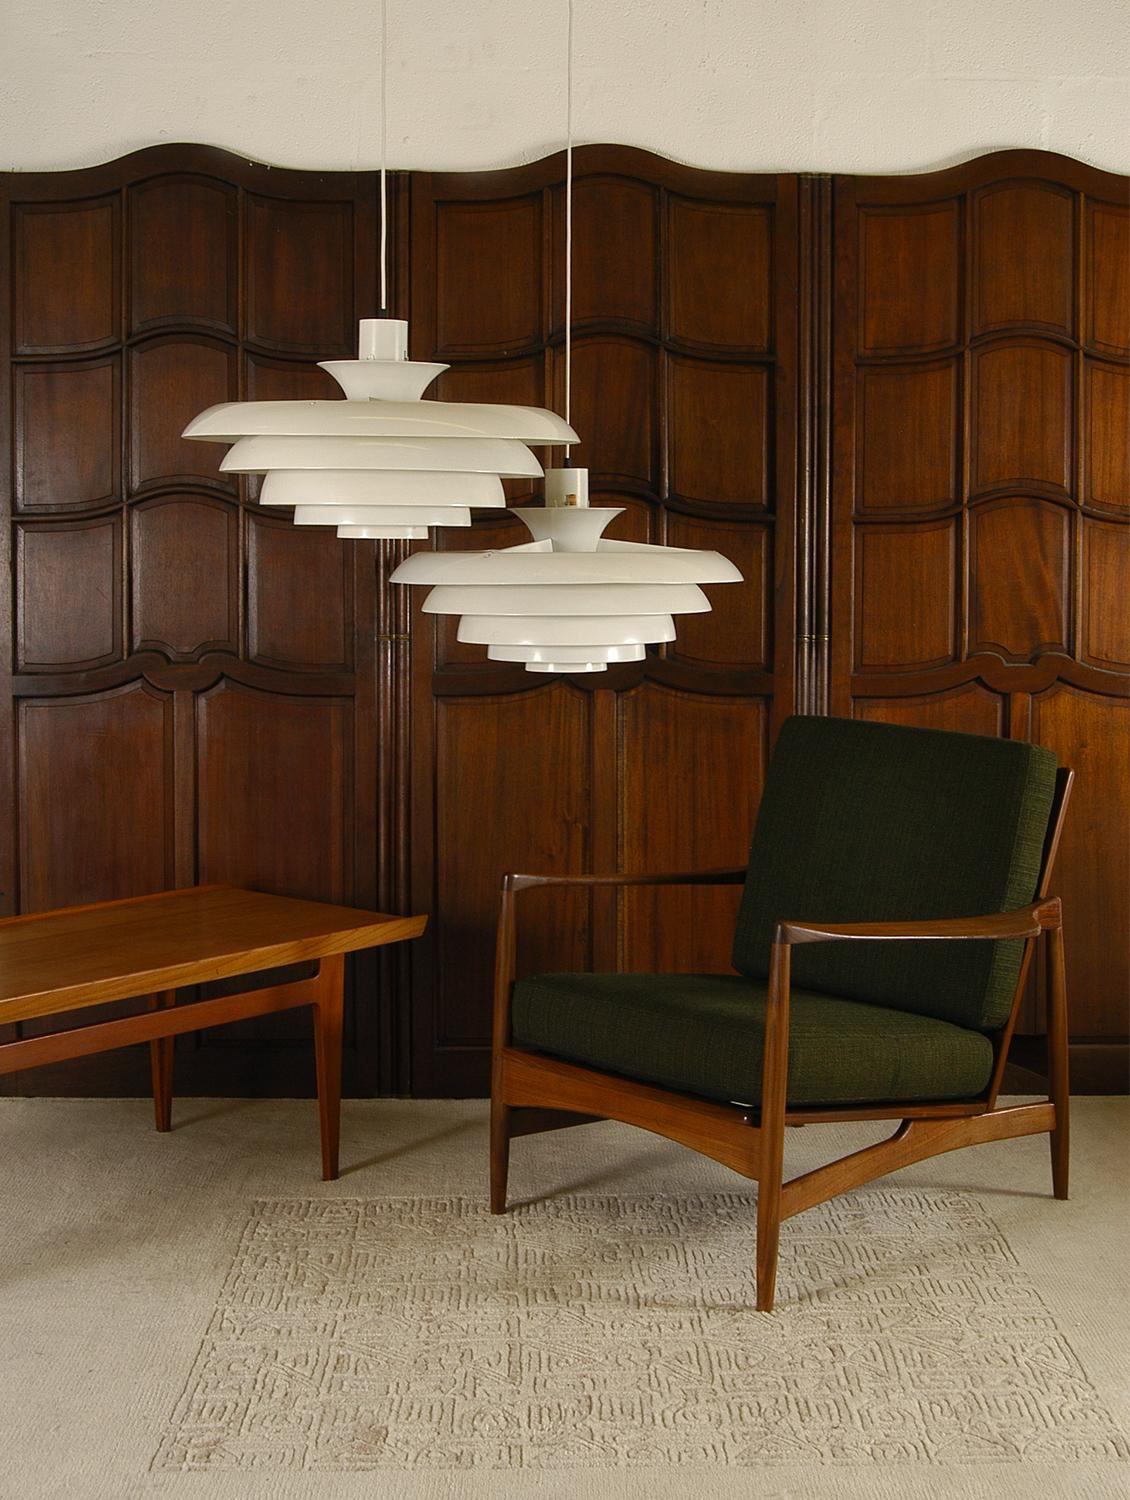 Great pair of substantially sized ceiling lamps by Fagerhults Belysning of Sweden. From a central three-armed steel frame containing the hidden bulb holder, hang four contoured aluminium shade rings each one held to each other by a thin steel wire.